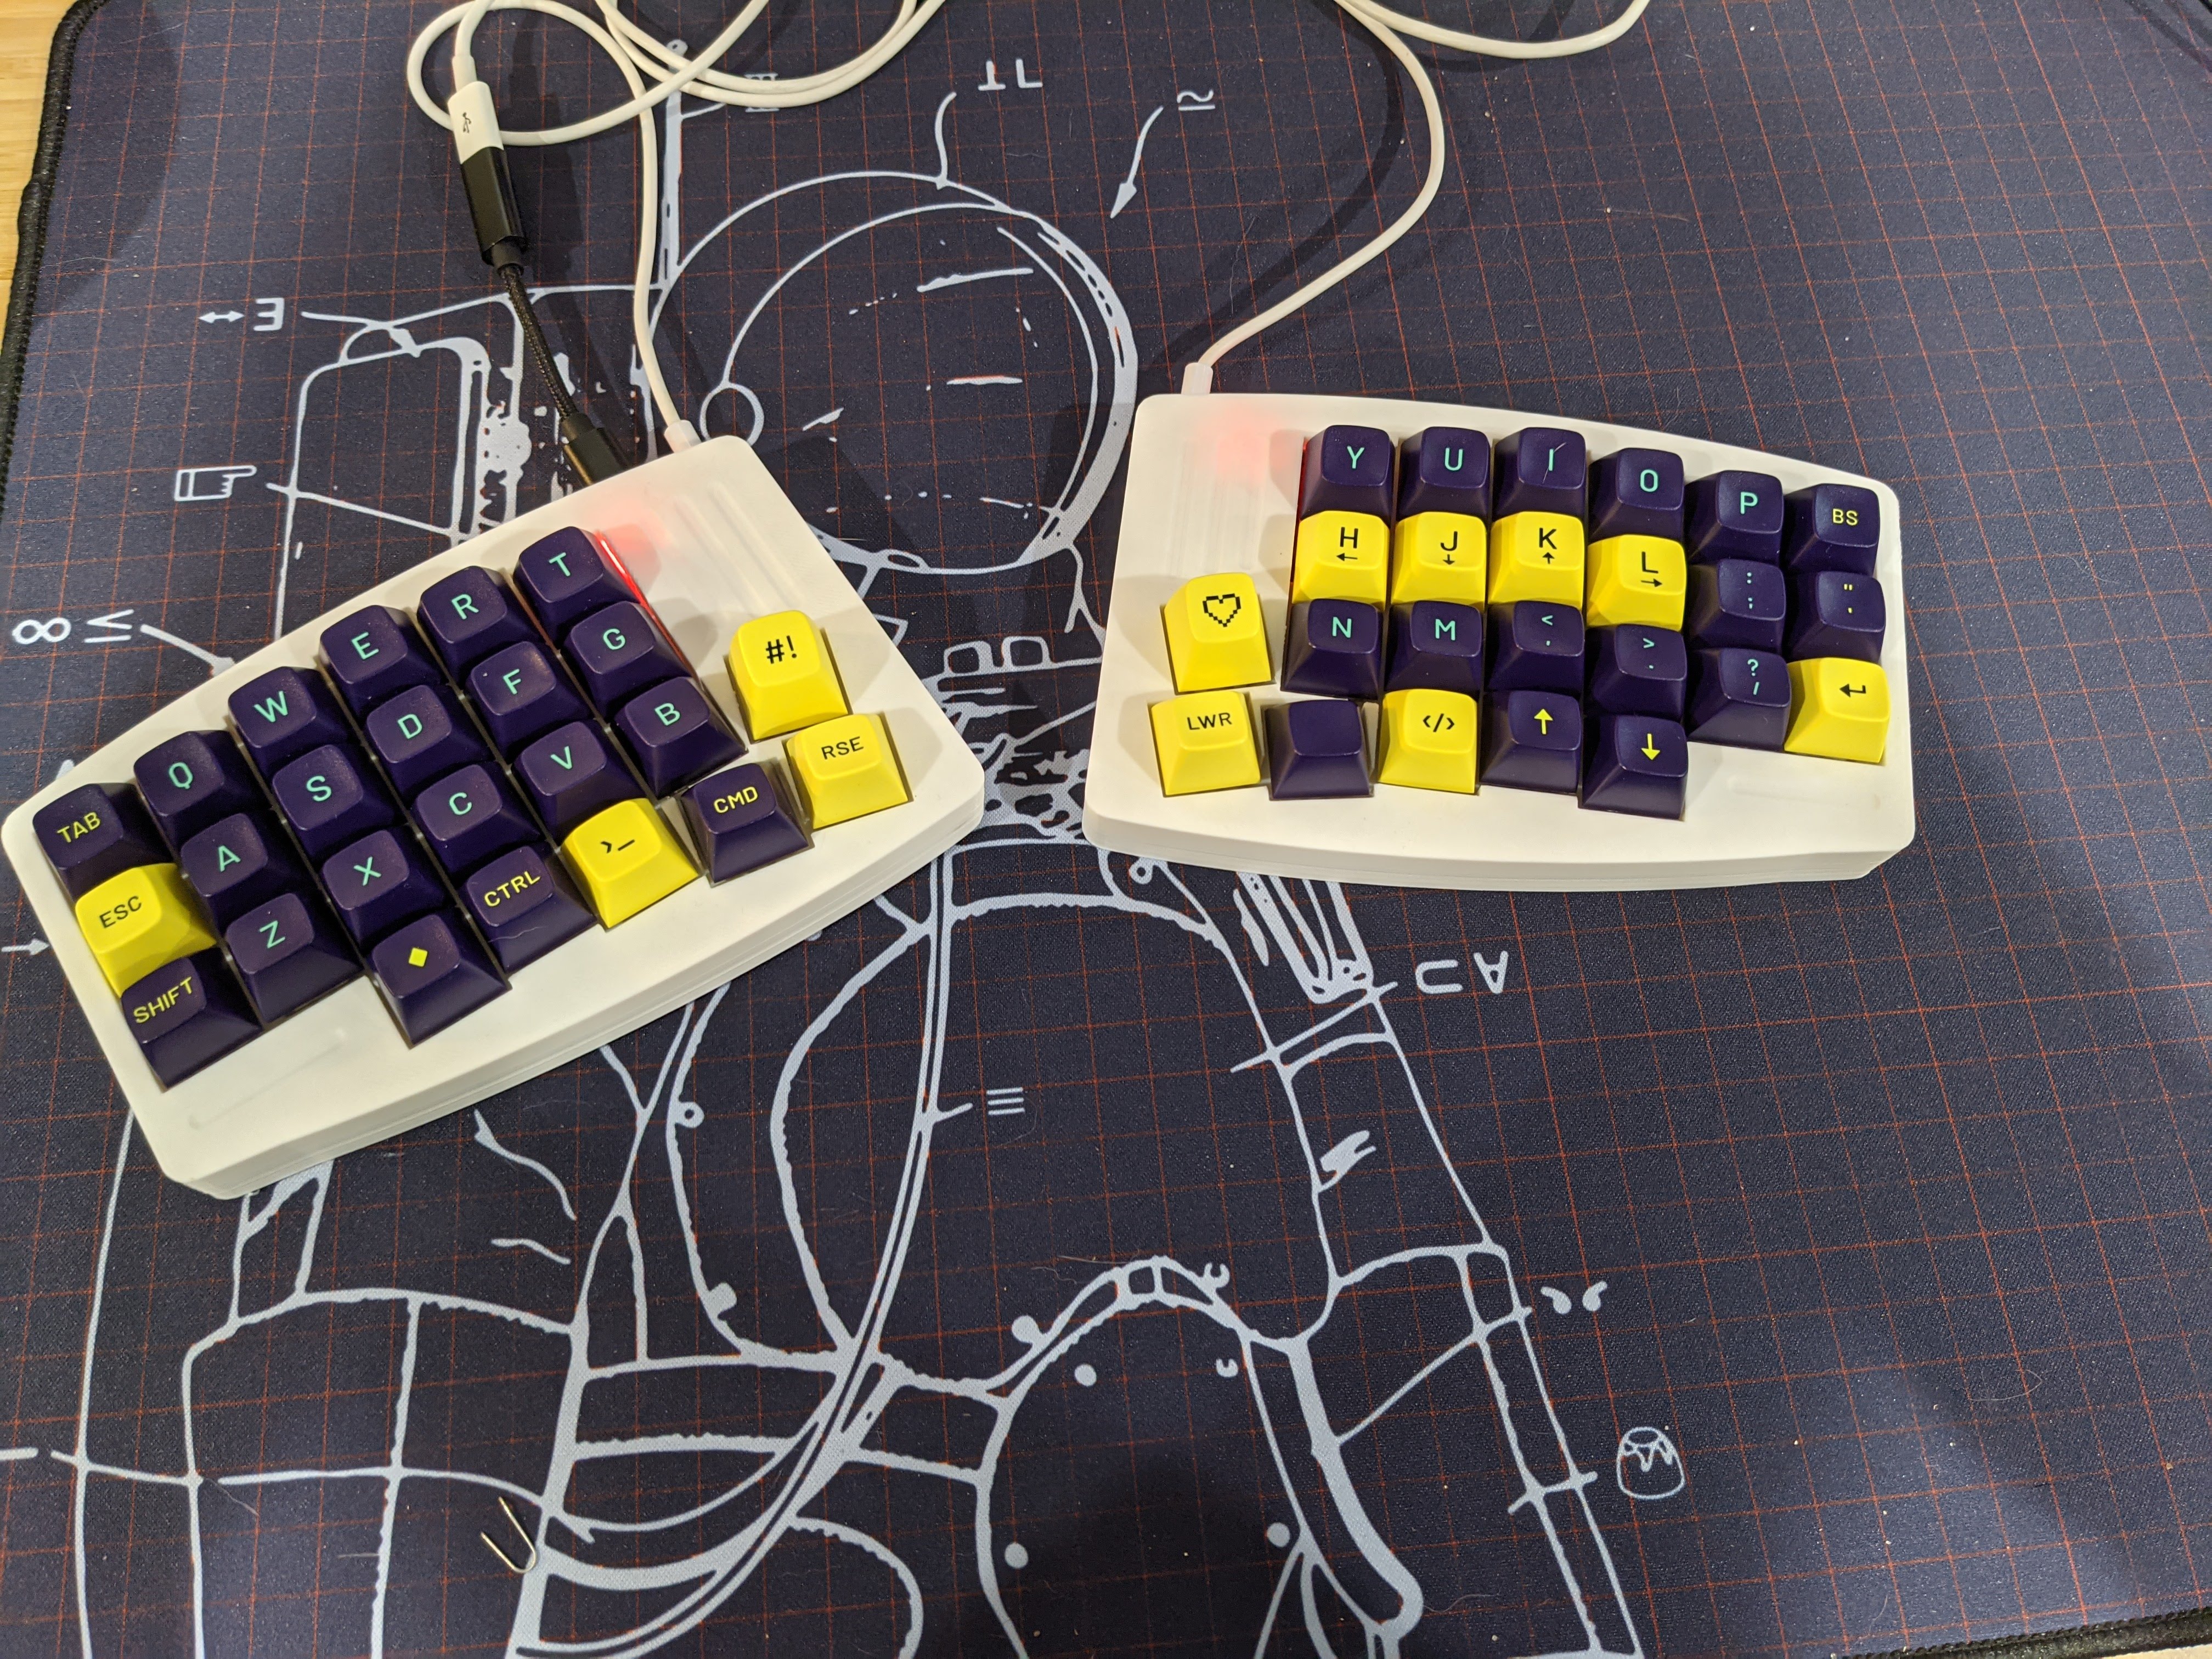 White plastic split ortholinear keyboard with blue and yellow keycaps in a grid, 24 keys on each half. Background is a blue desk pad with a line drawing of an astronaut.